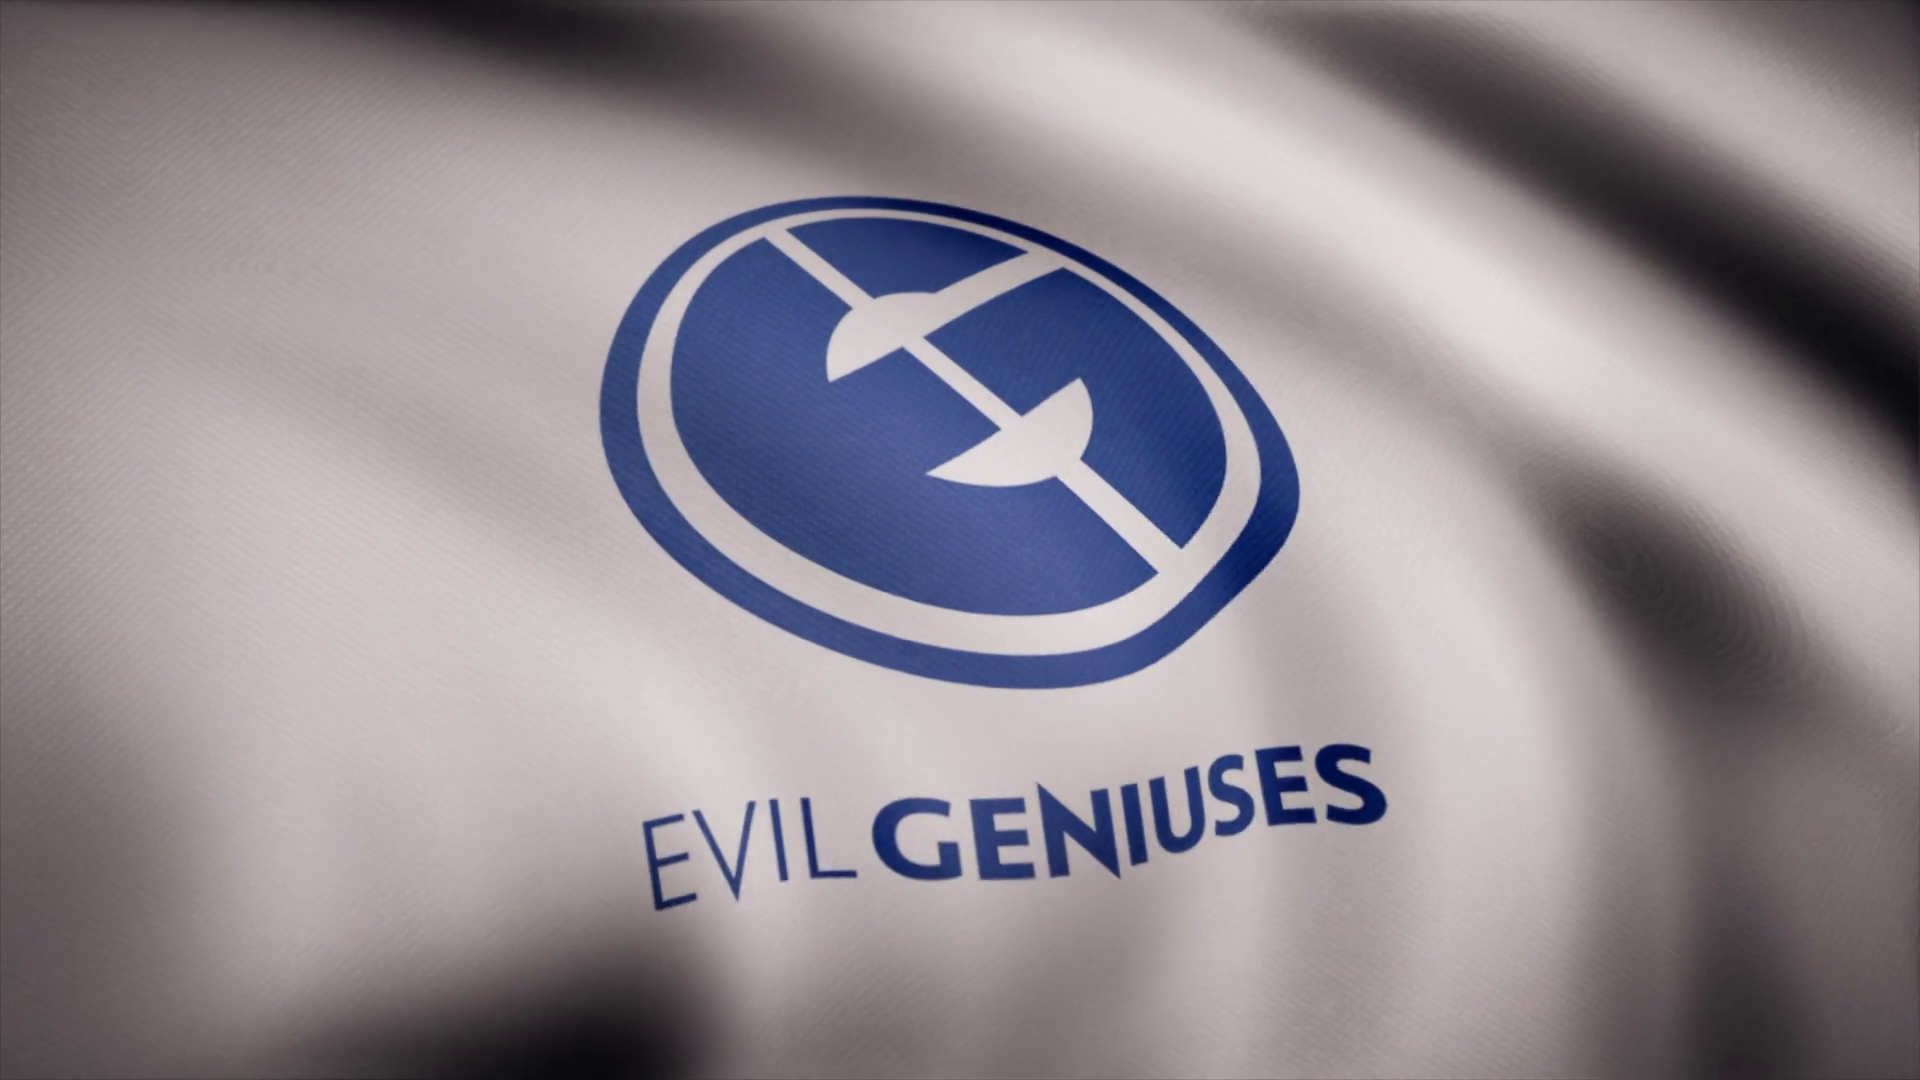 Cybergaming Evil Geniuses Flag Is Waving On Transparent